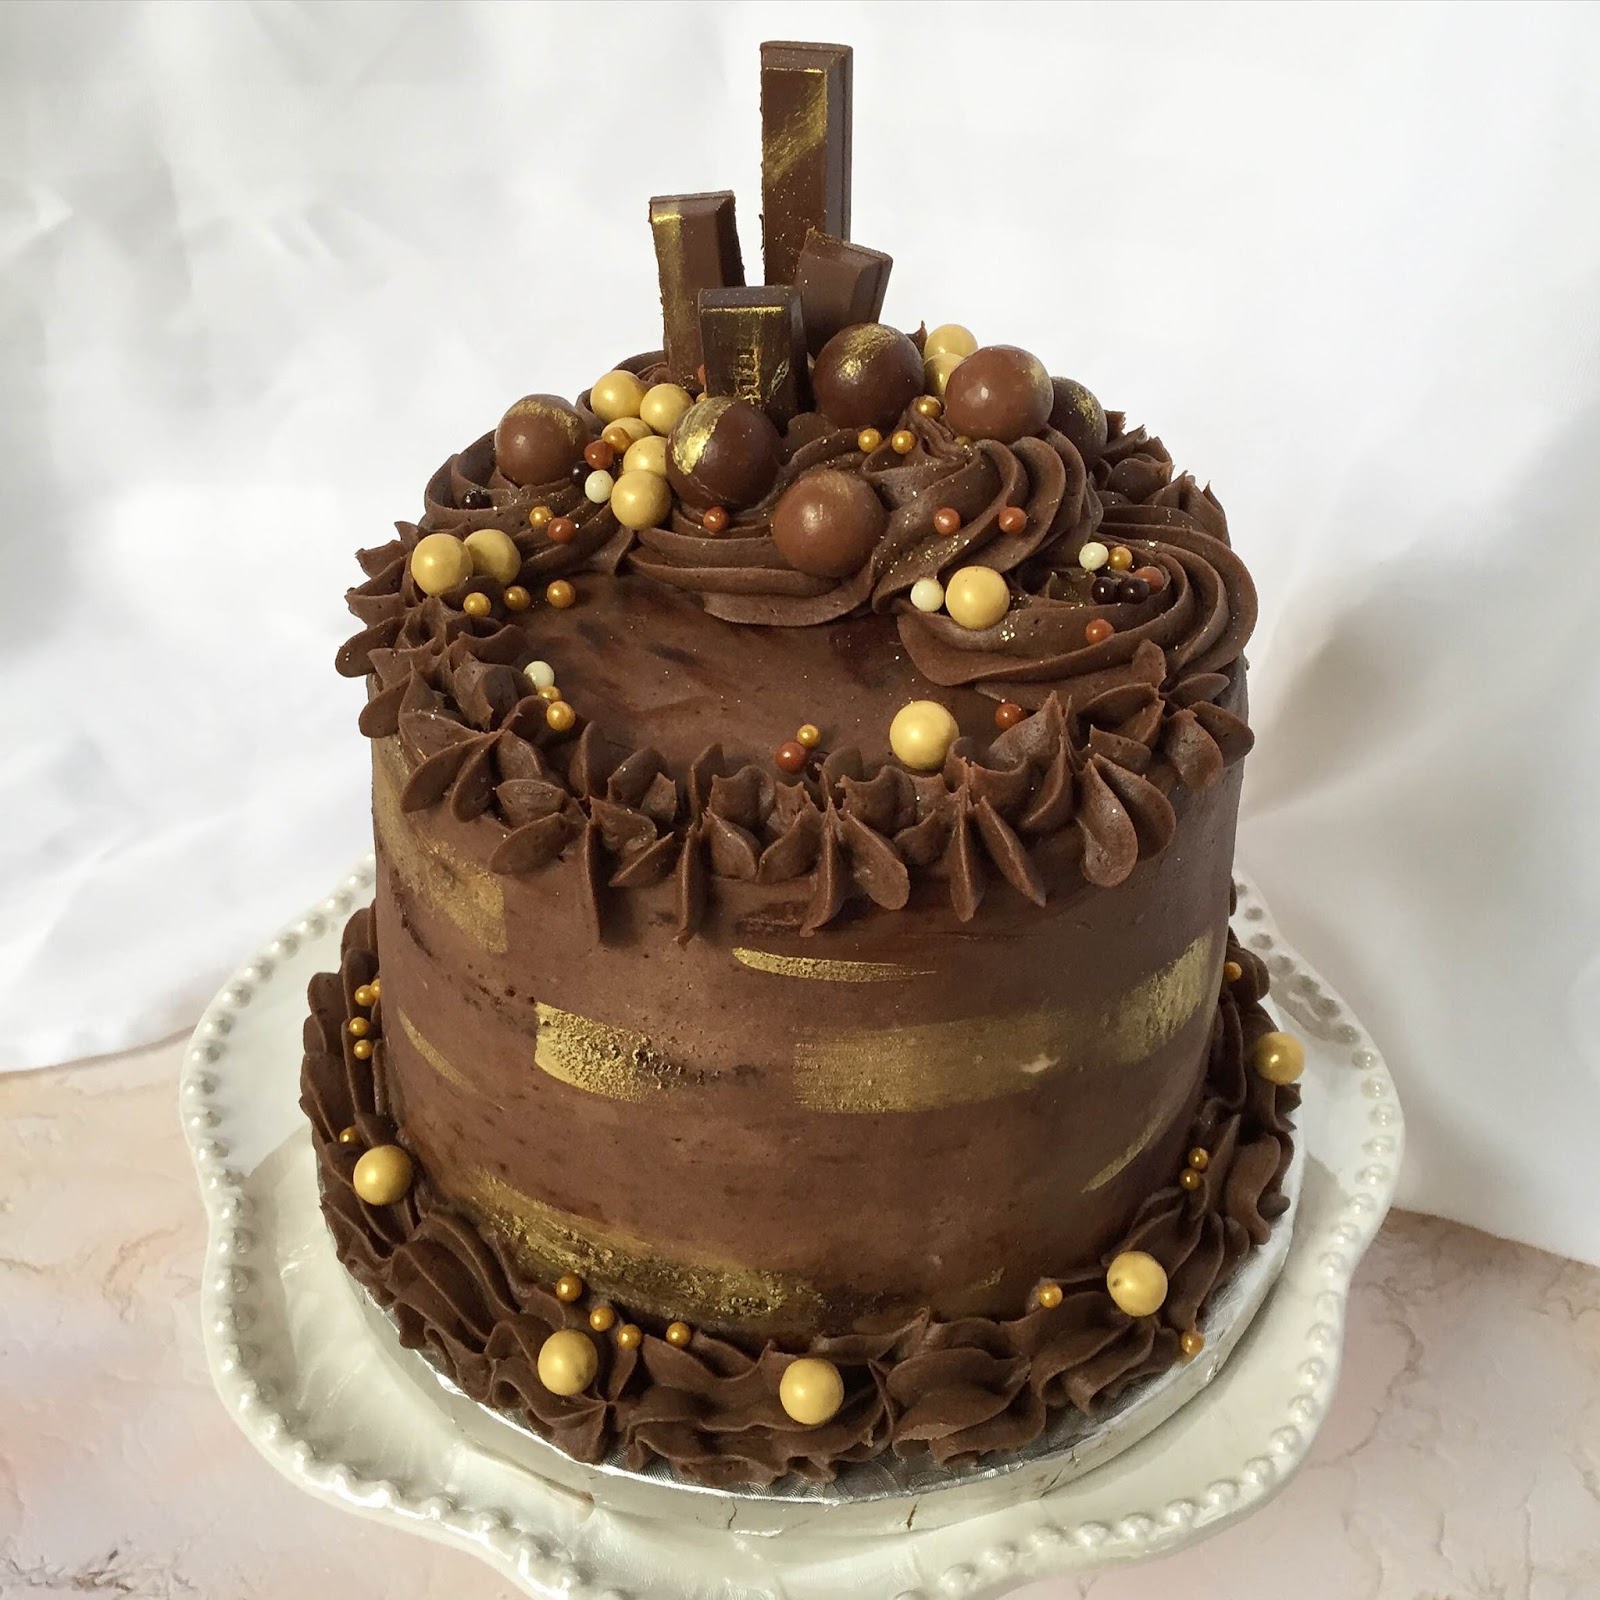 2-tier Wicked Chocolate cake iced in gold ganache decorate…